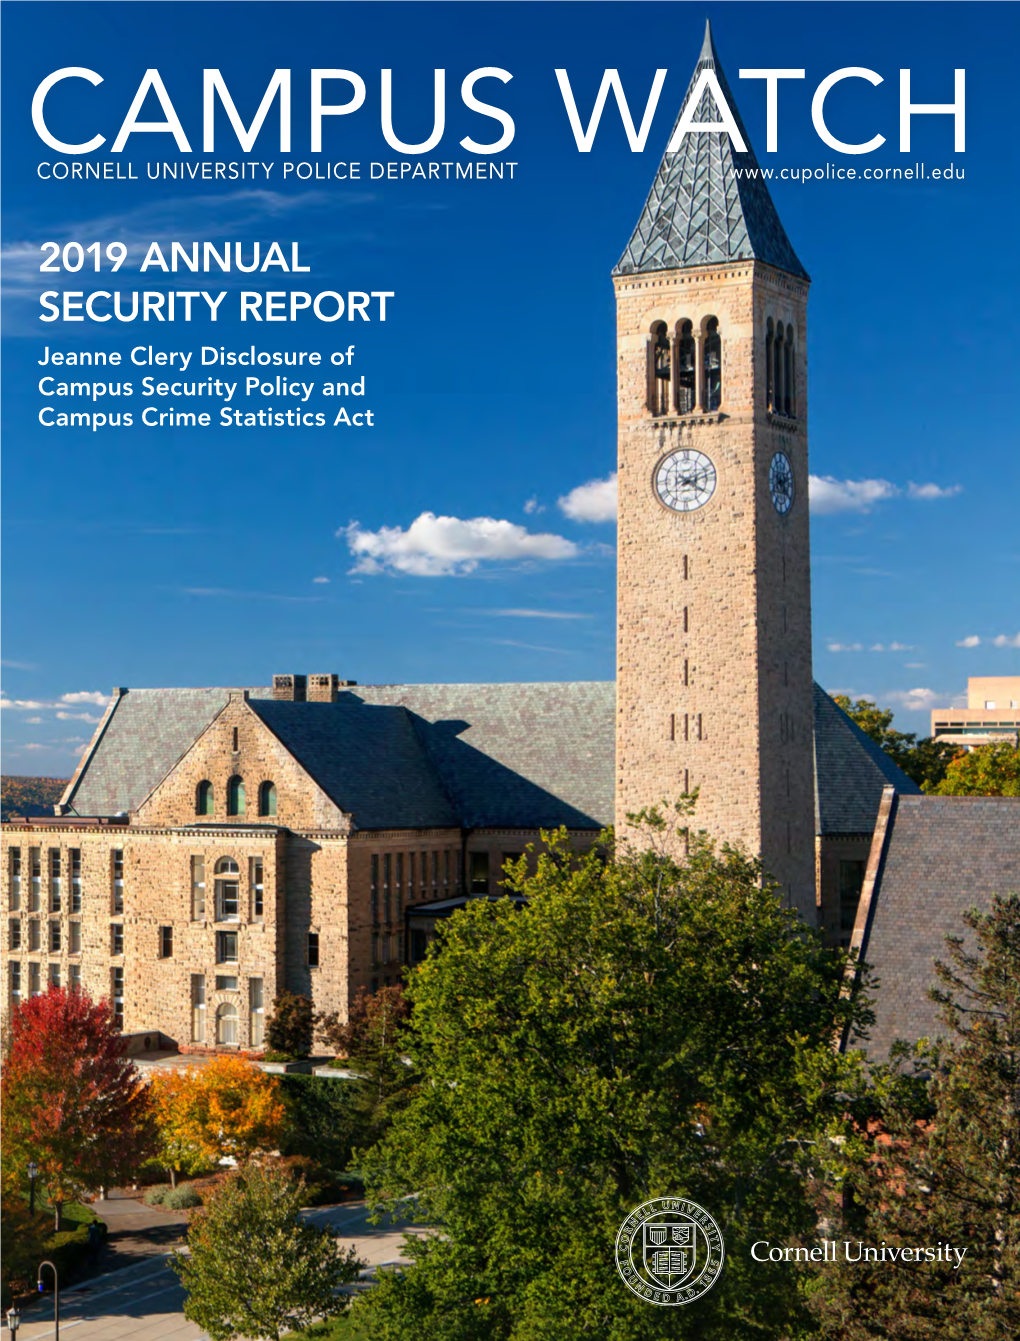 2019 ANNUAL SECURITY REPORT Jeanne Clery Disclosure of Campus Security Policy and Campus Crime Statistics Act